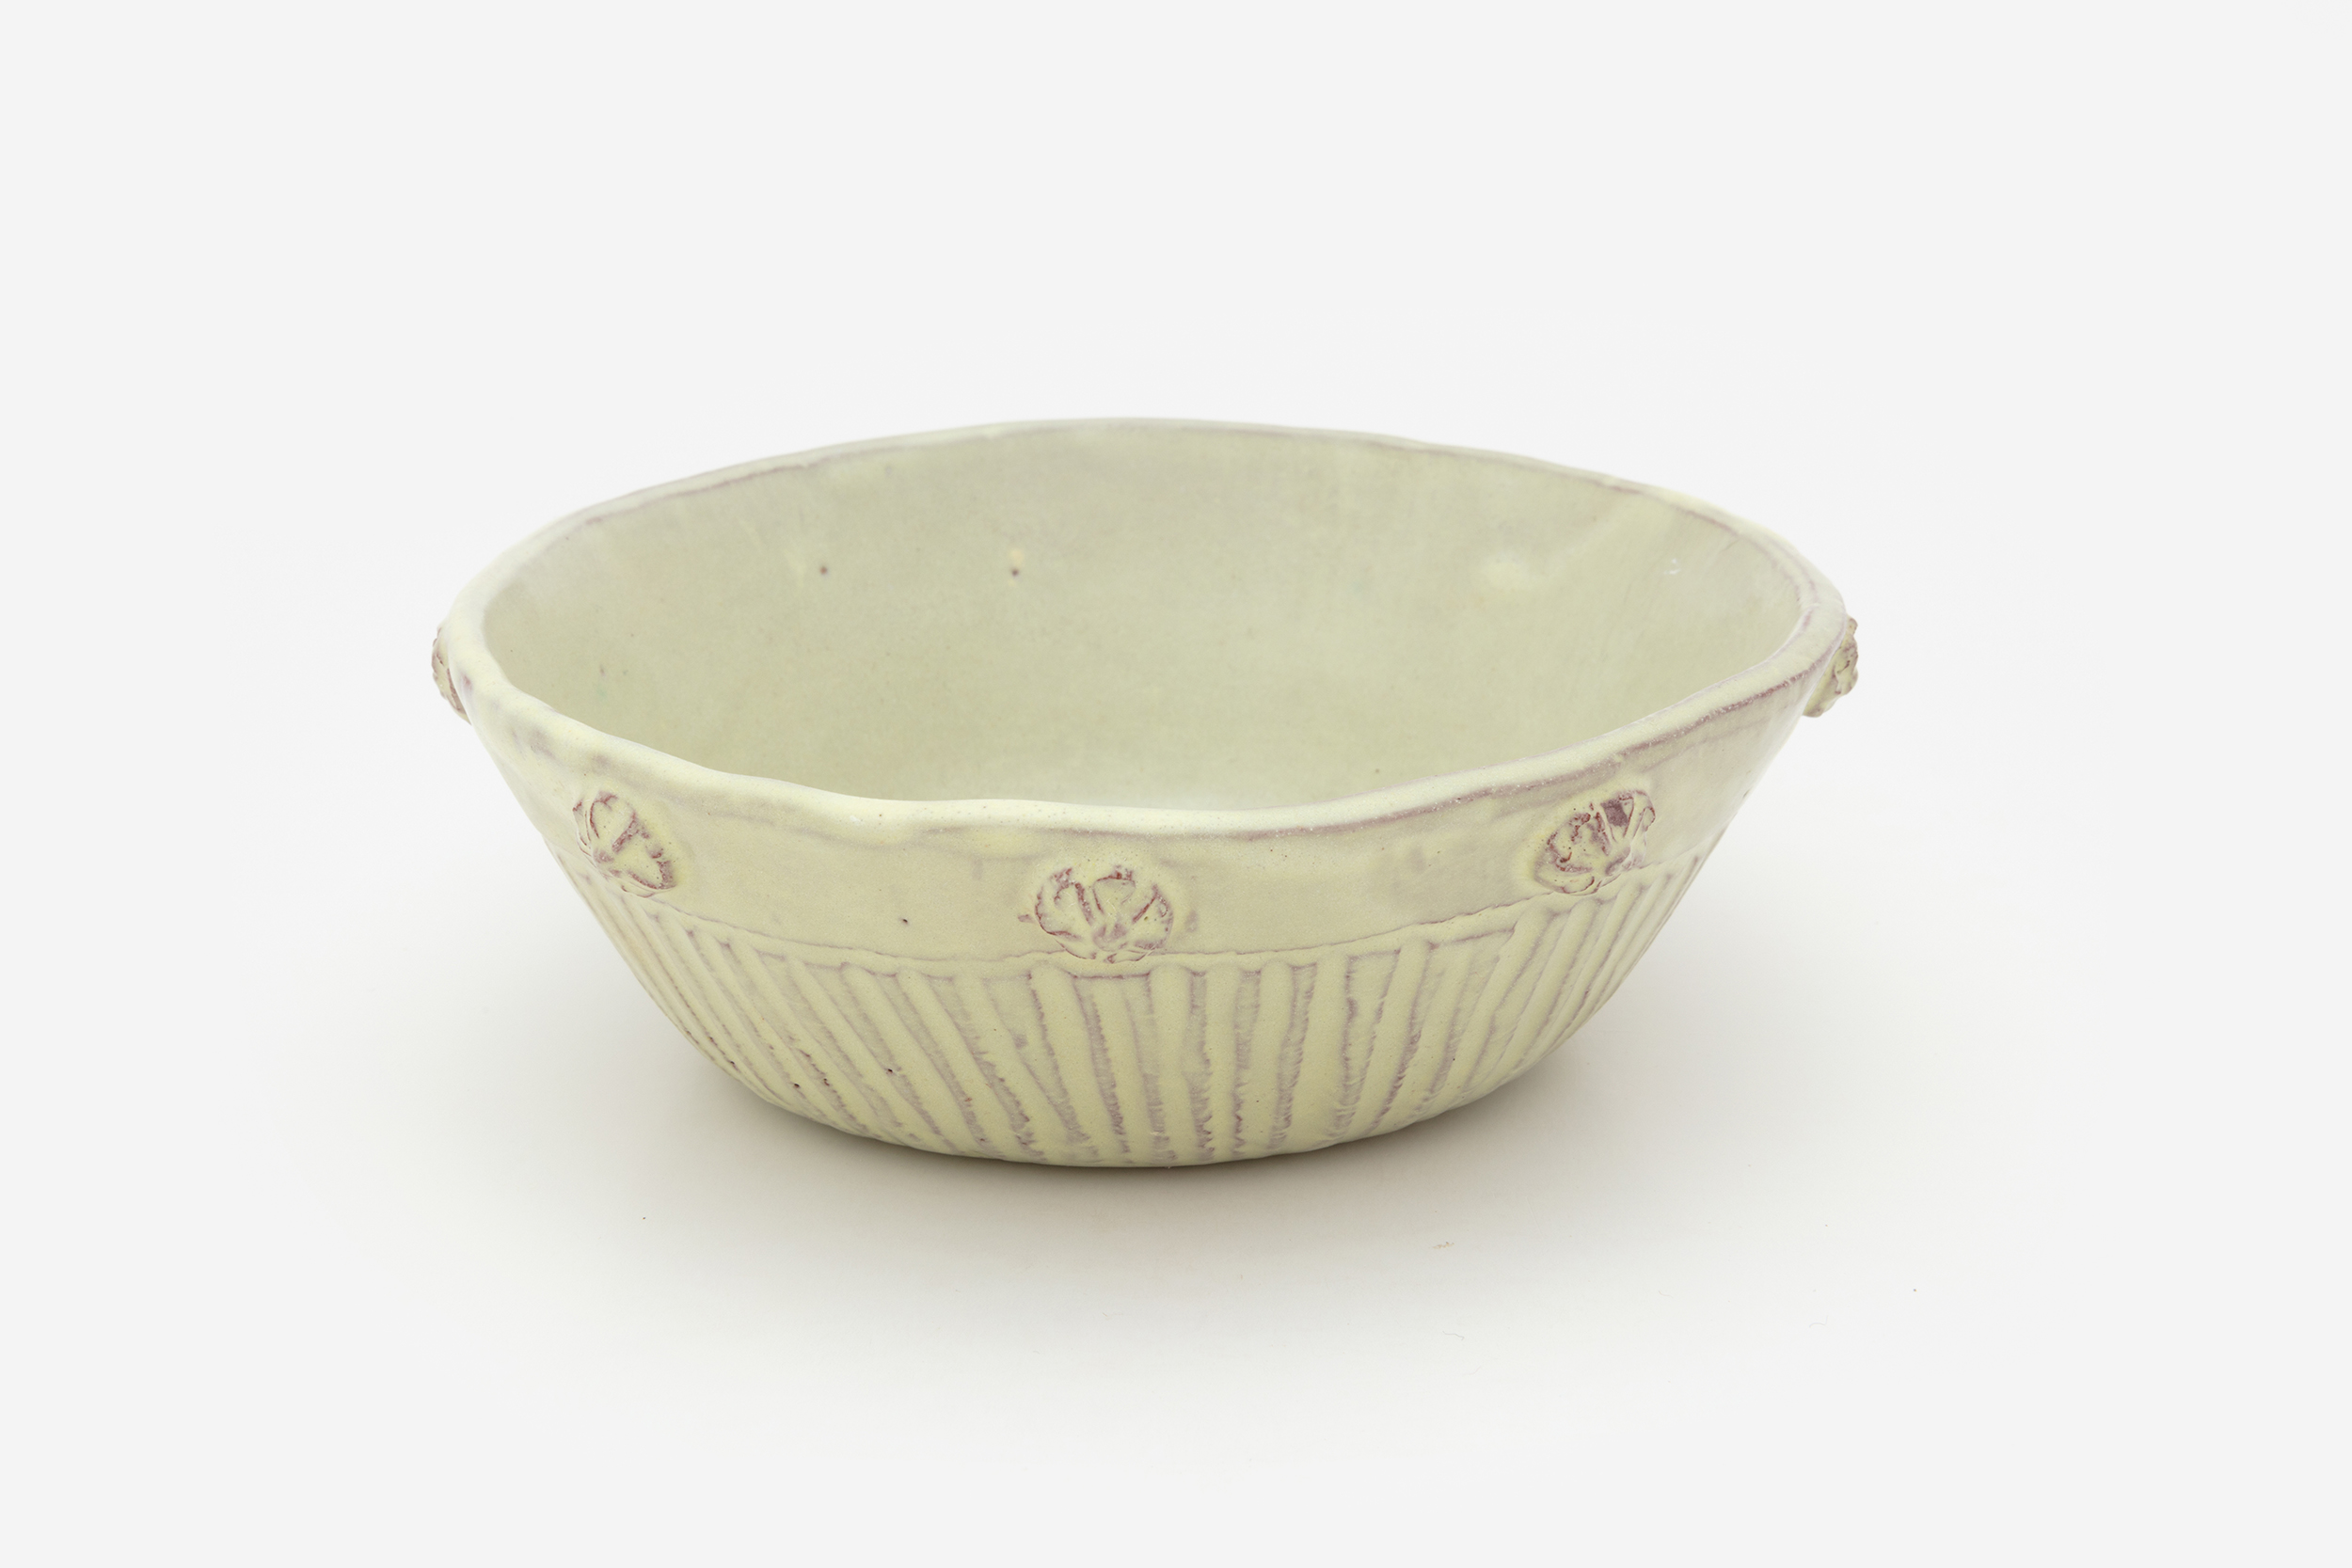 Hylton Nel - Flowers and lines bowl, 